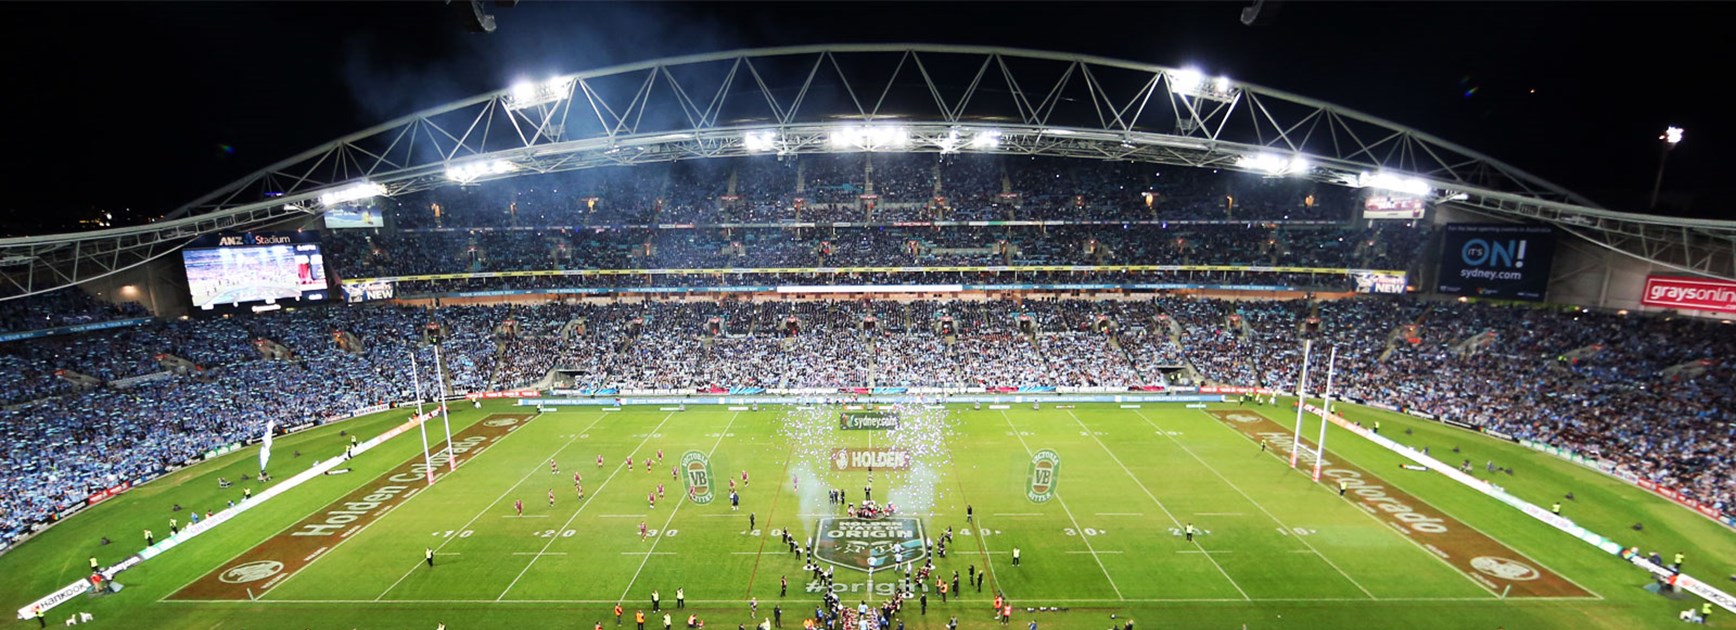 The NSW Blues will host State of Origin I at ANZ Stadium.